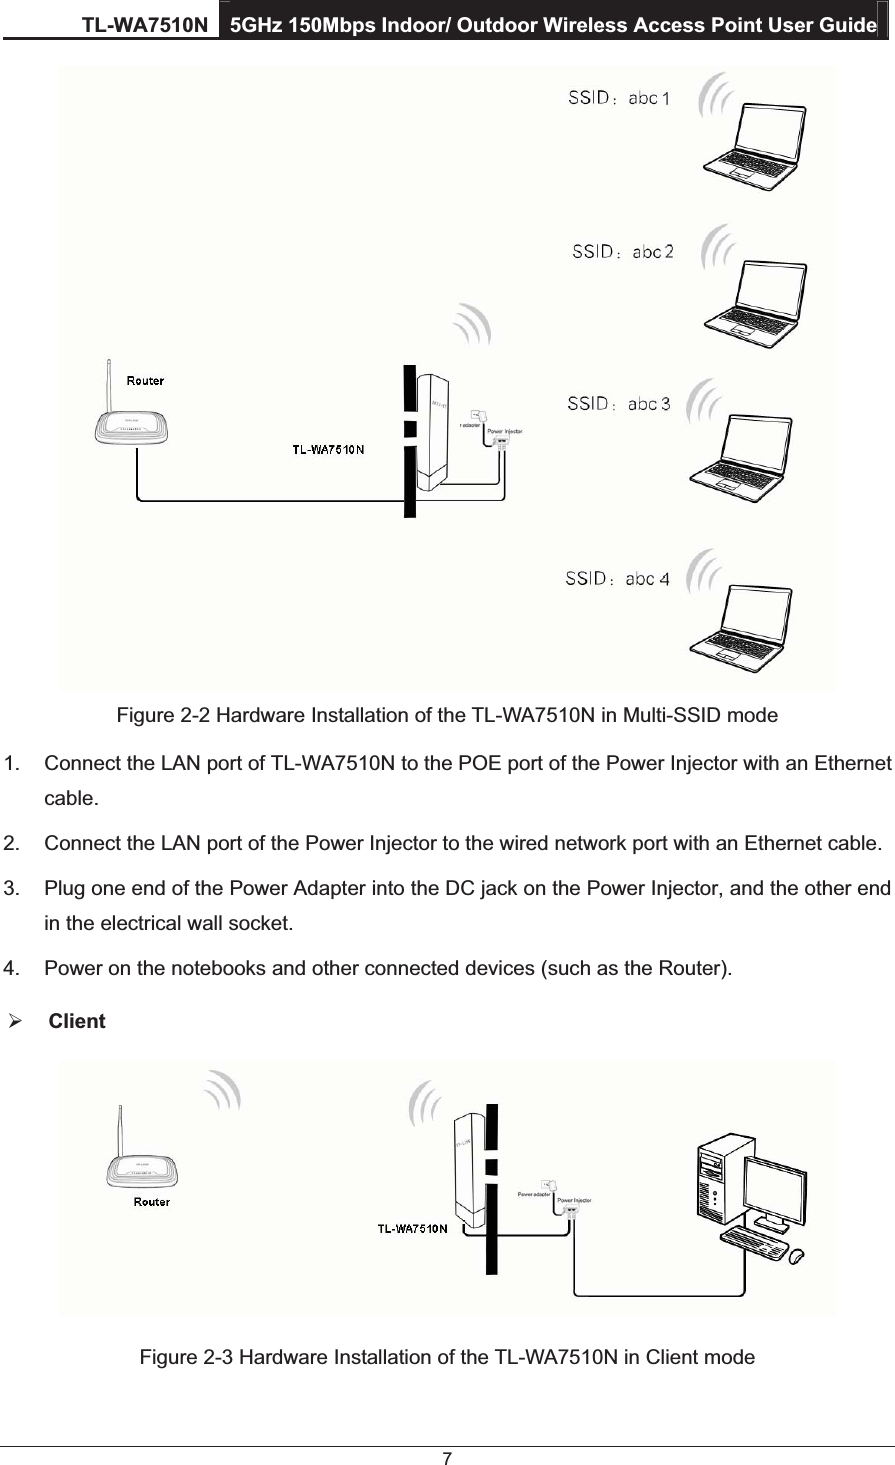 TL-WA7510N 5GHz 150Mbps Indoor/ Outdoor Wireless Access Point User Guide 7  Figure 2-2 Hardware Installation of the TL-WA7510N in Multi-SSID mode 1.  Connect the LAN port of TL-WA7510N to the POE port of the Power Injector with an Ethernet cable. 2.  Connect the LAN port of the Power Injector to the wired network port with an Ethernet cable. 3.  Plug one end of the Power Adapter into the DC jack on the Power Injector, and the other end in the electrical wall socket. 4.  Power on the notebooks and other connected devices (such as the Router). ¾ Client  Figure 2-3 Hardware Installation of the TL-WA7510N in Client mode 